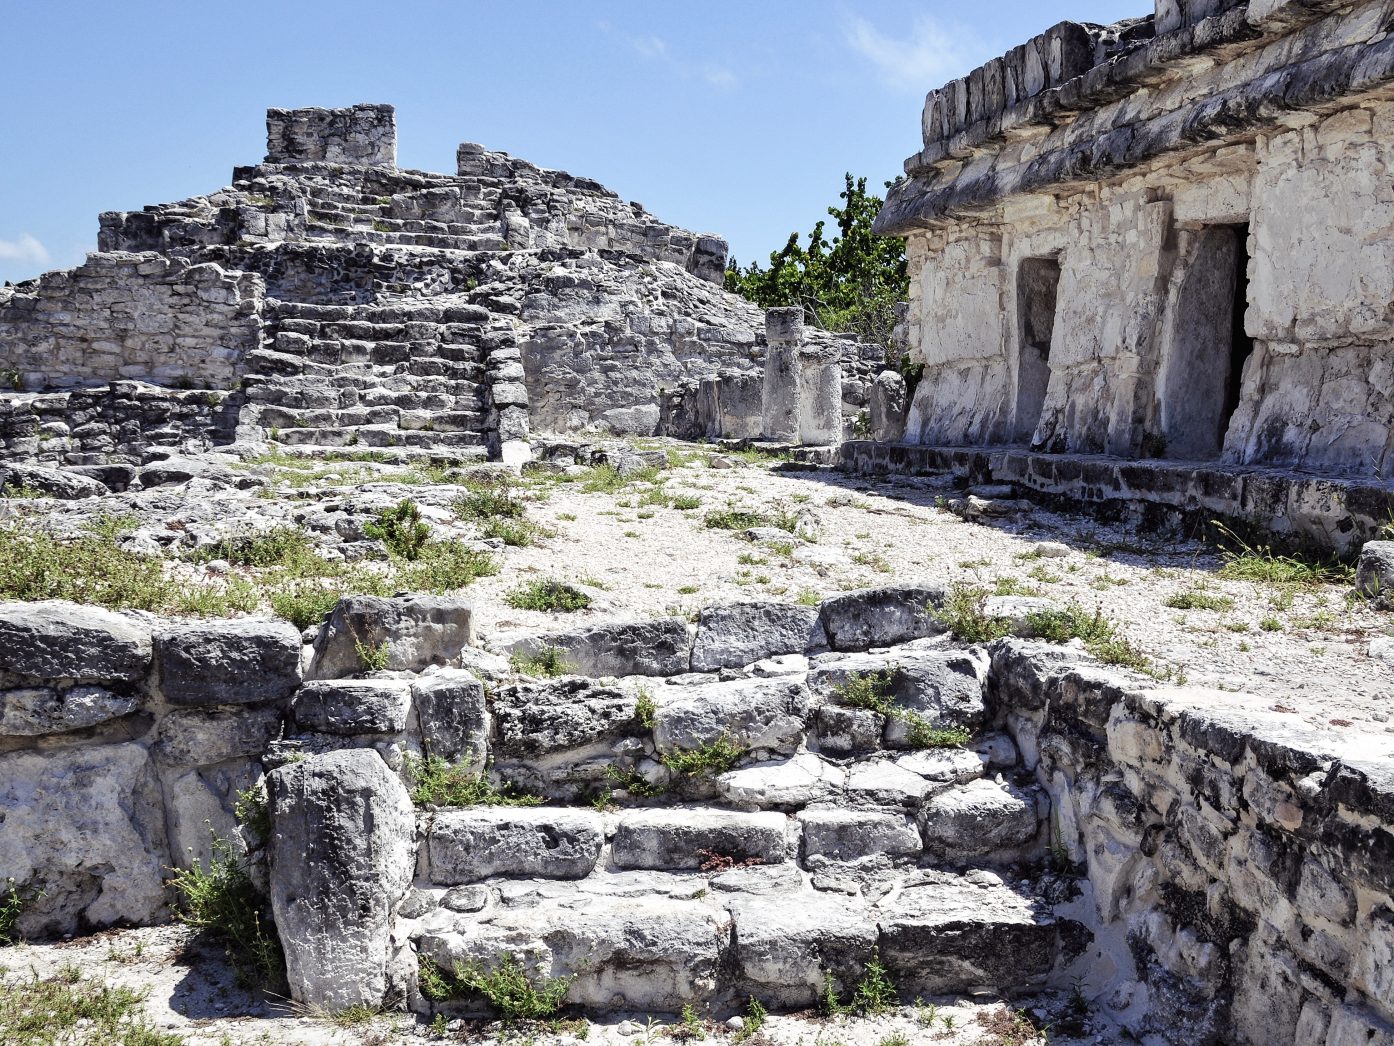 El Rey Ruins with stairs you can climb. It's one of the mayan ruins near Cancun, Mexico.